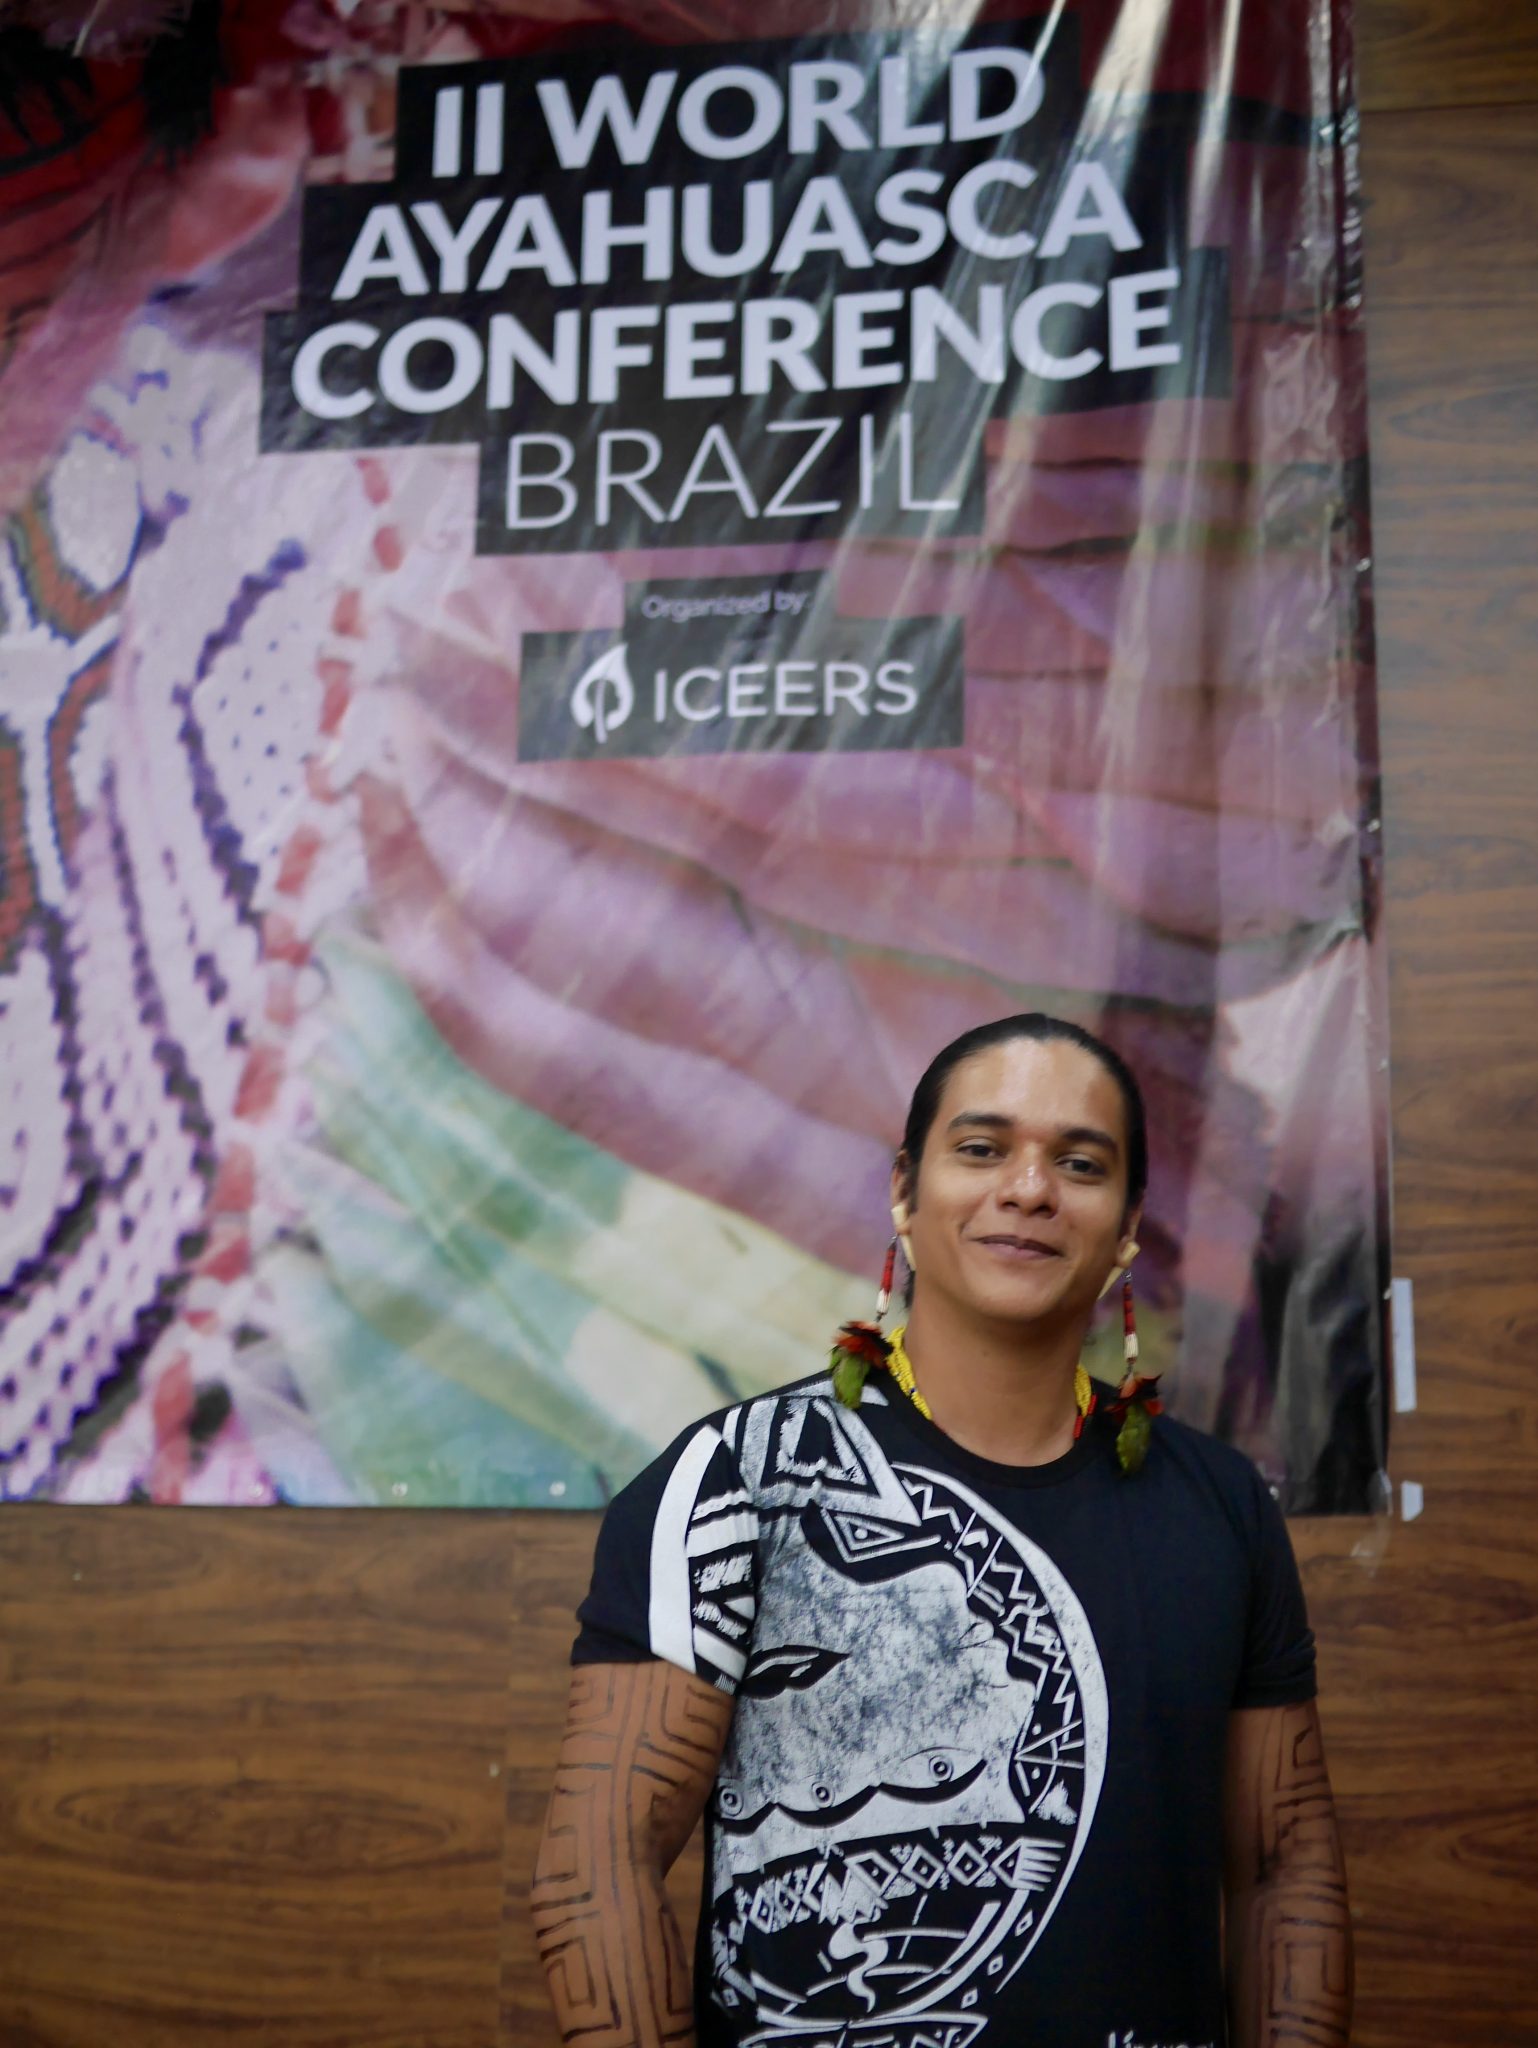 Ayahuasca Conference Indigenous Youth Brazil